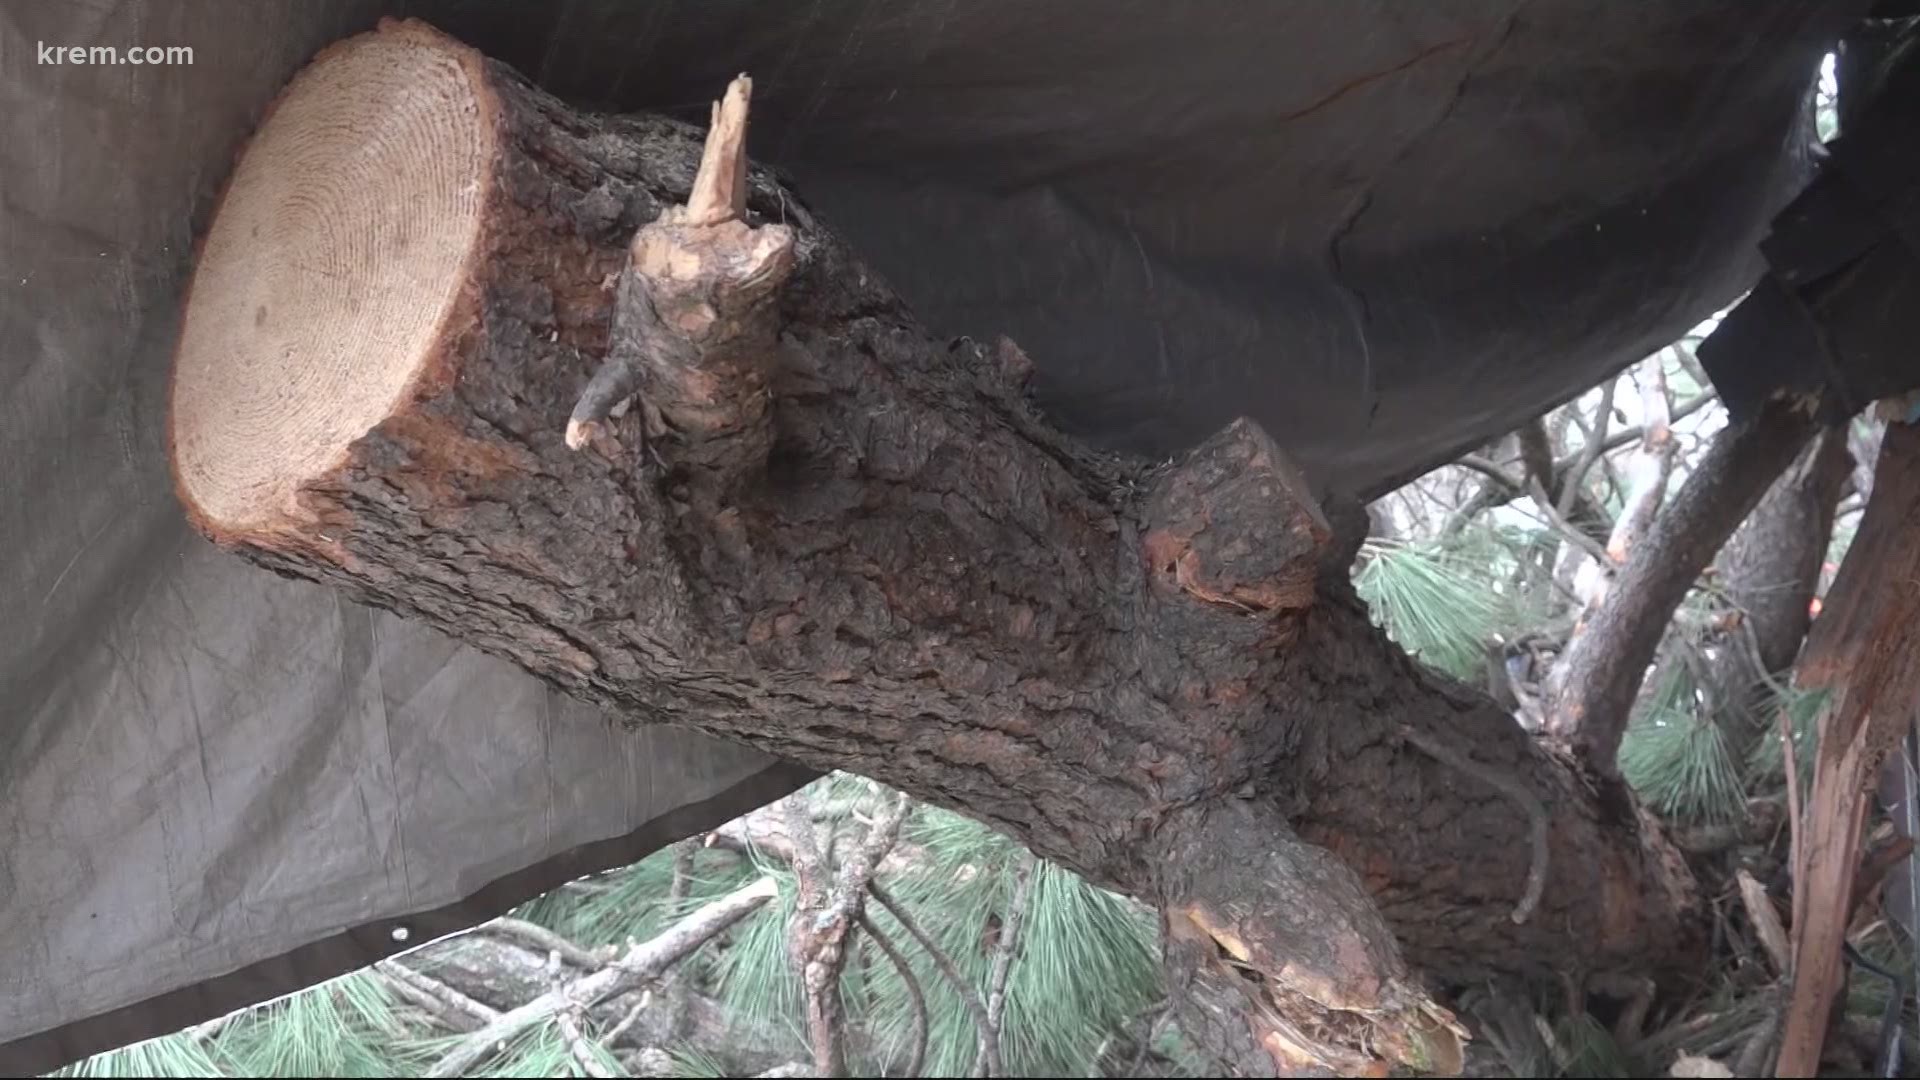 Boy OK after tree falls on him in Coeur d'Alene and more KREM 2 News headlines at 6 p.m. on January 15, 2021.